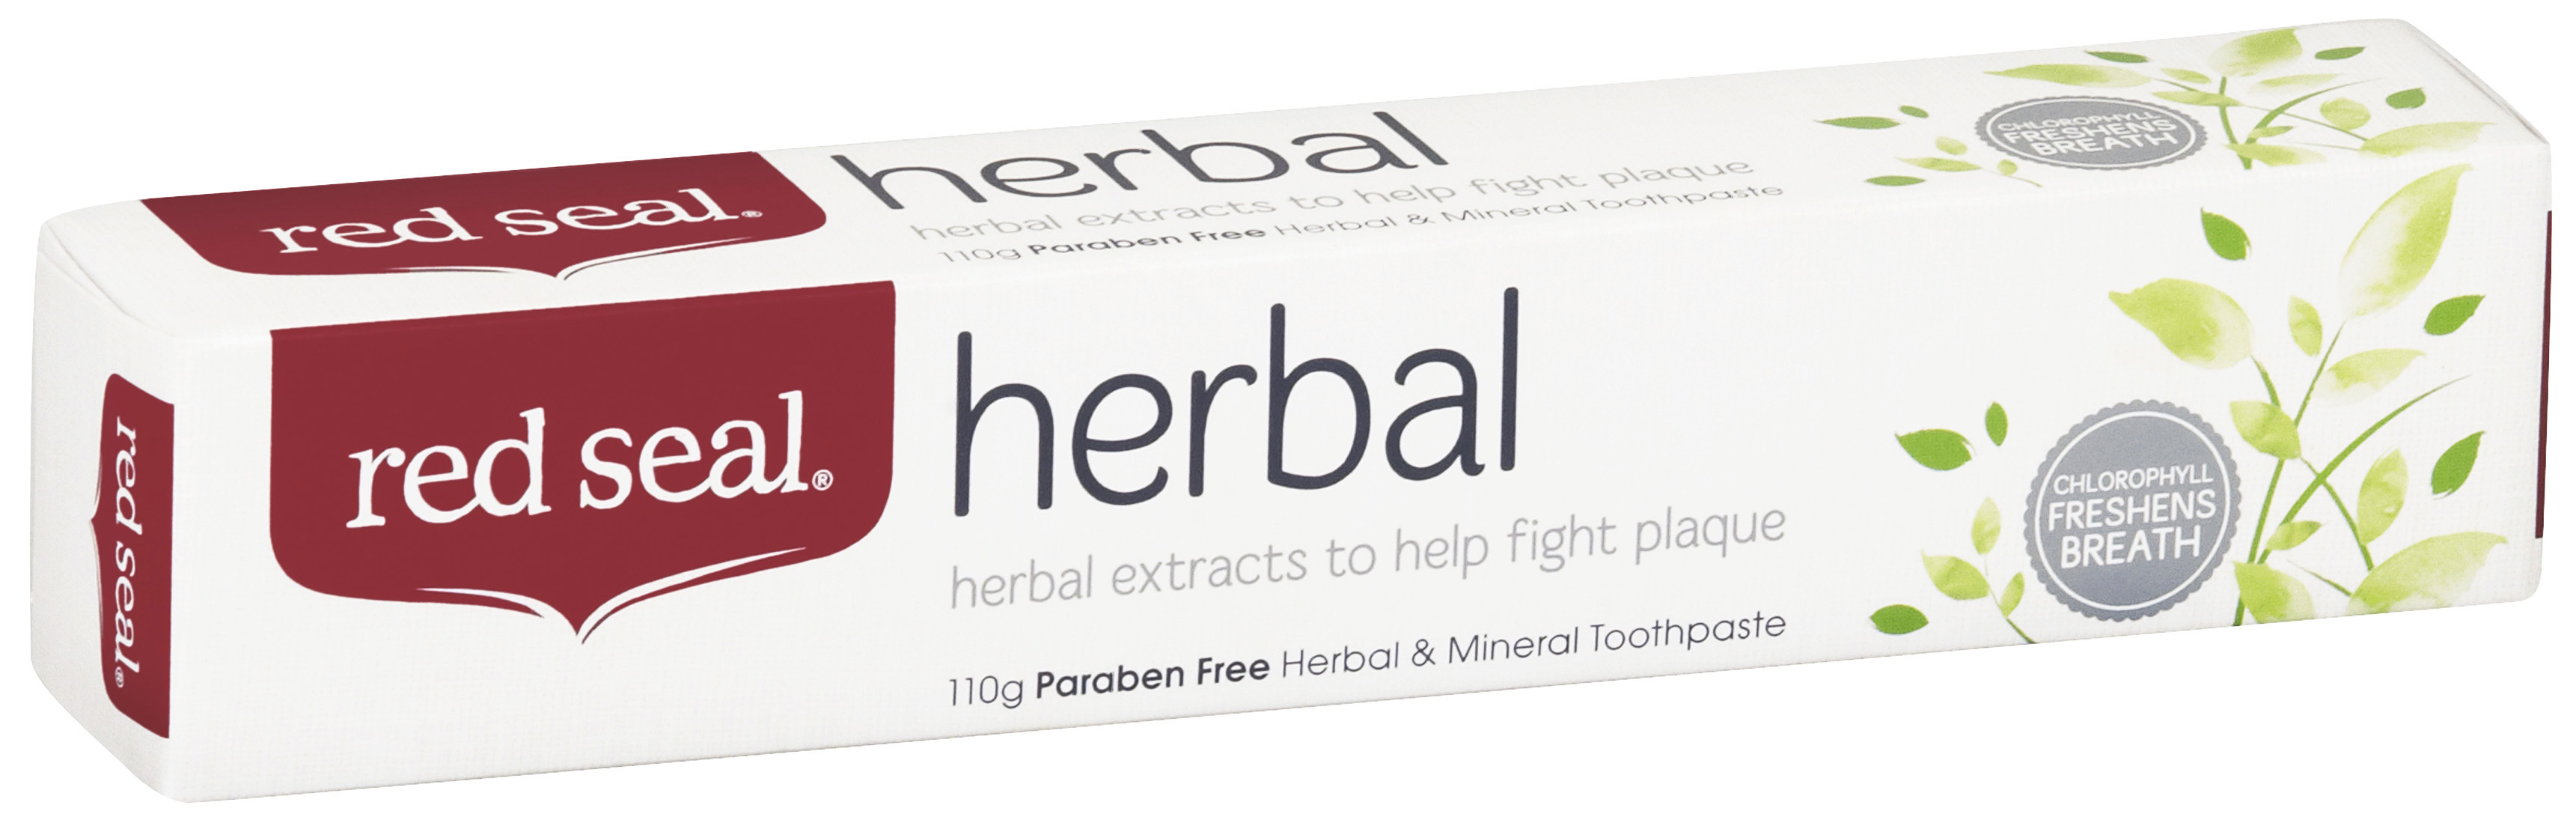 Rs24-12-red-seal-herbal-toothpaste